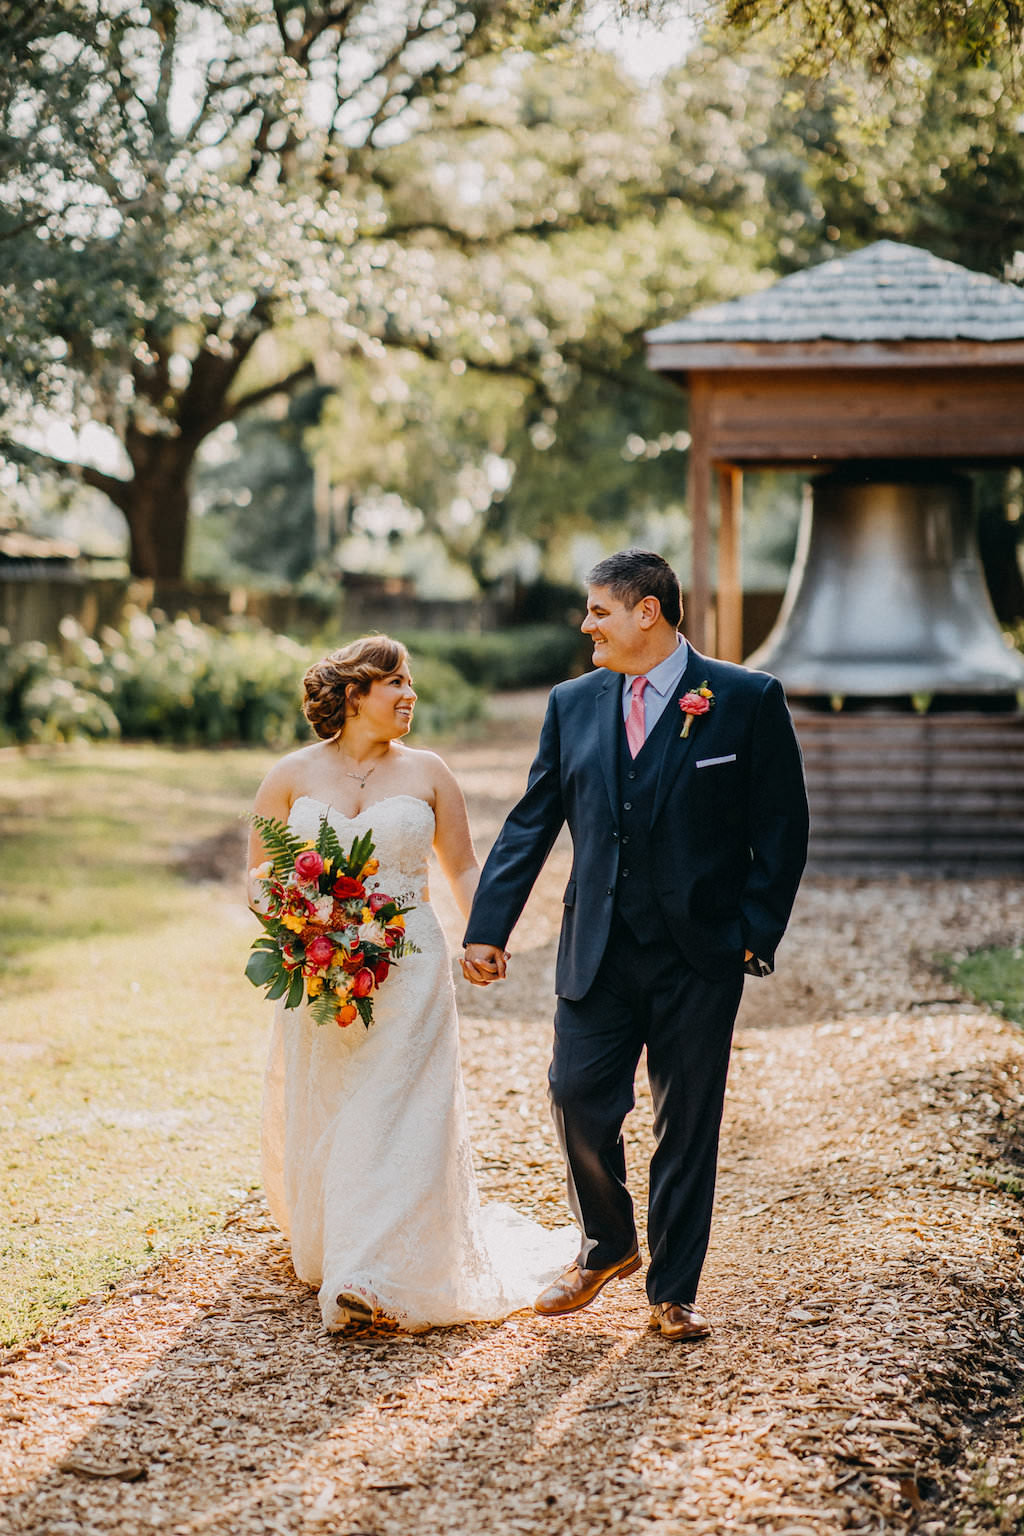 Outdoor Bride and Groom Wedding Portrait, Bride in A-Line Sweetheart Strapless Lace Wedding Dress with Tropical Floral Bouquet, Groom in Navy Blue Suit and Pink Tie | Tampa Bay Photographer Rad Red Creative | Rustic Venue Cross Creek Ranch